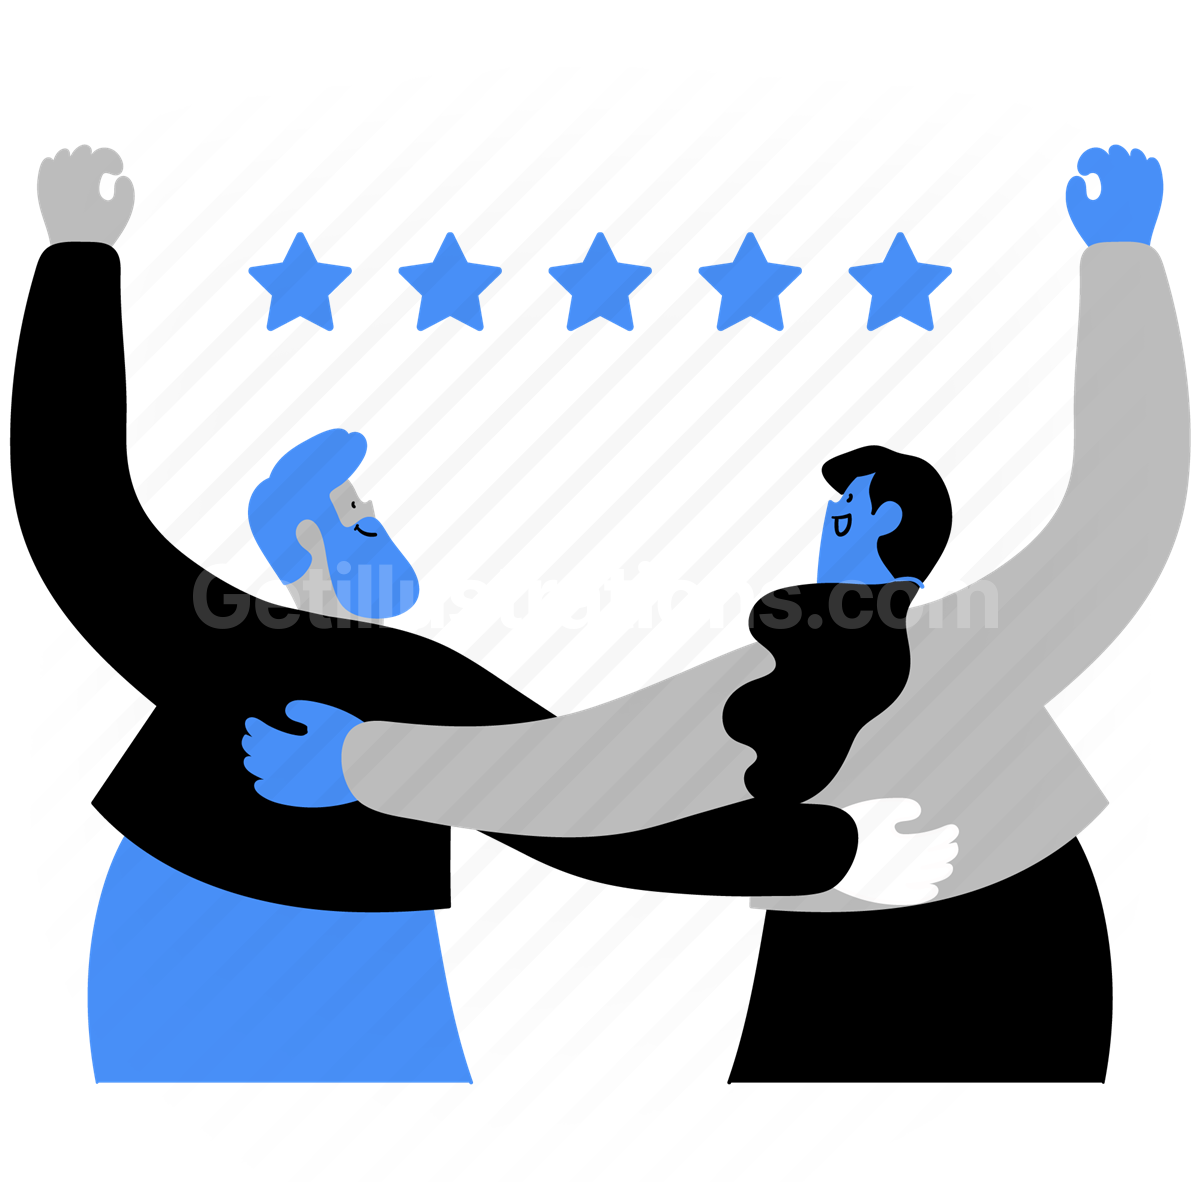 ratings, review, star, stars, feedback, client, customer